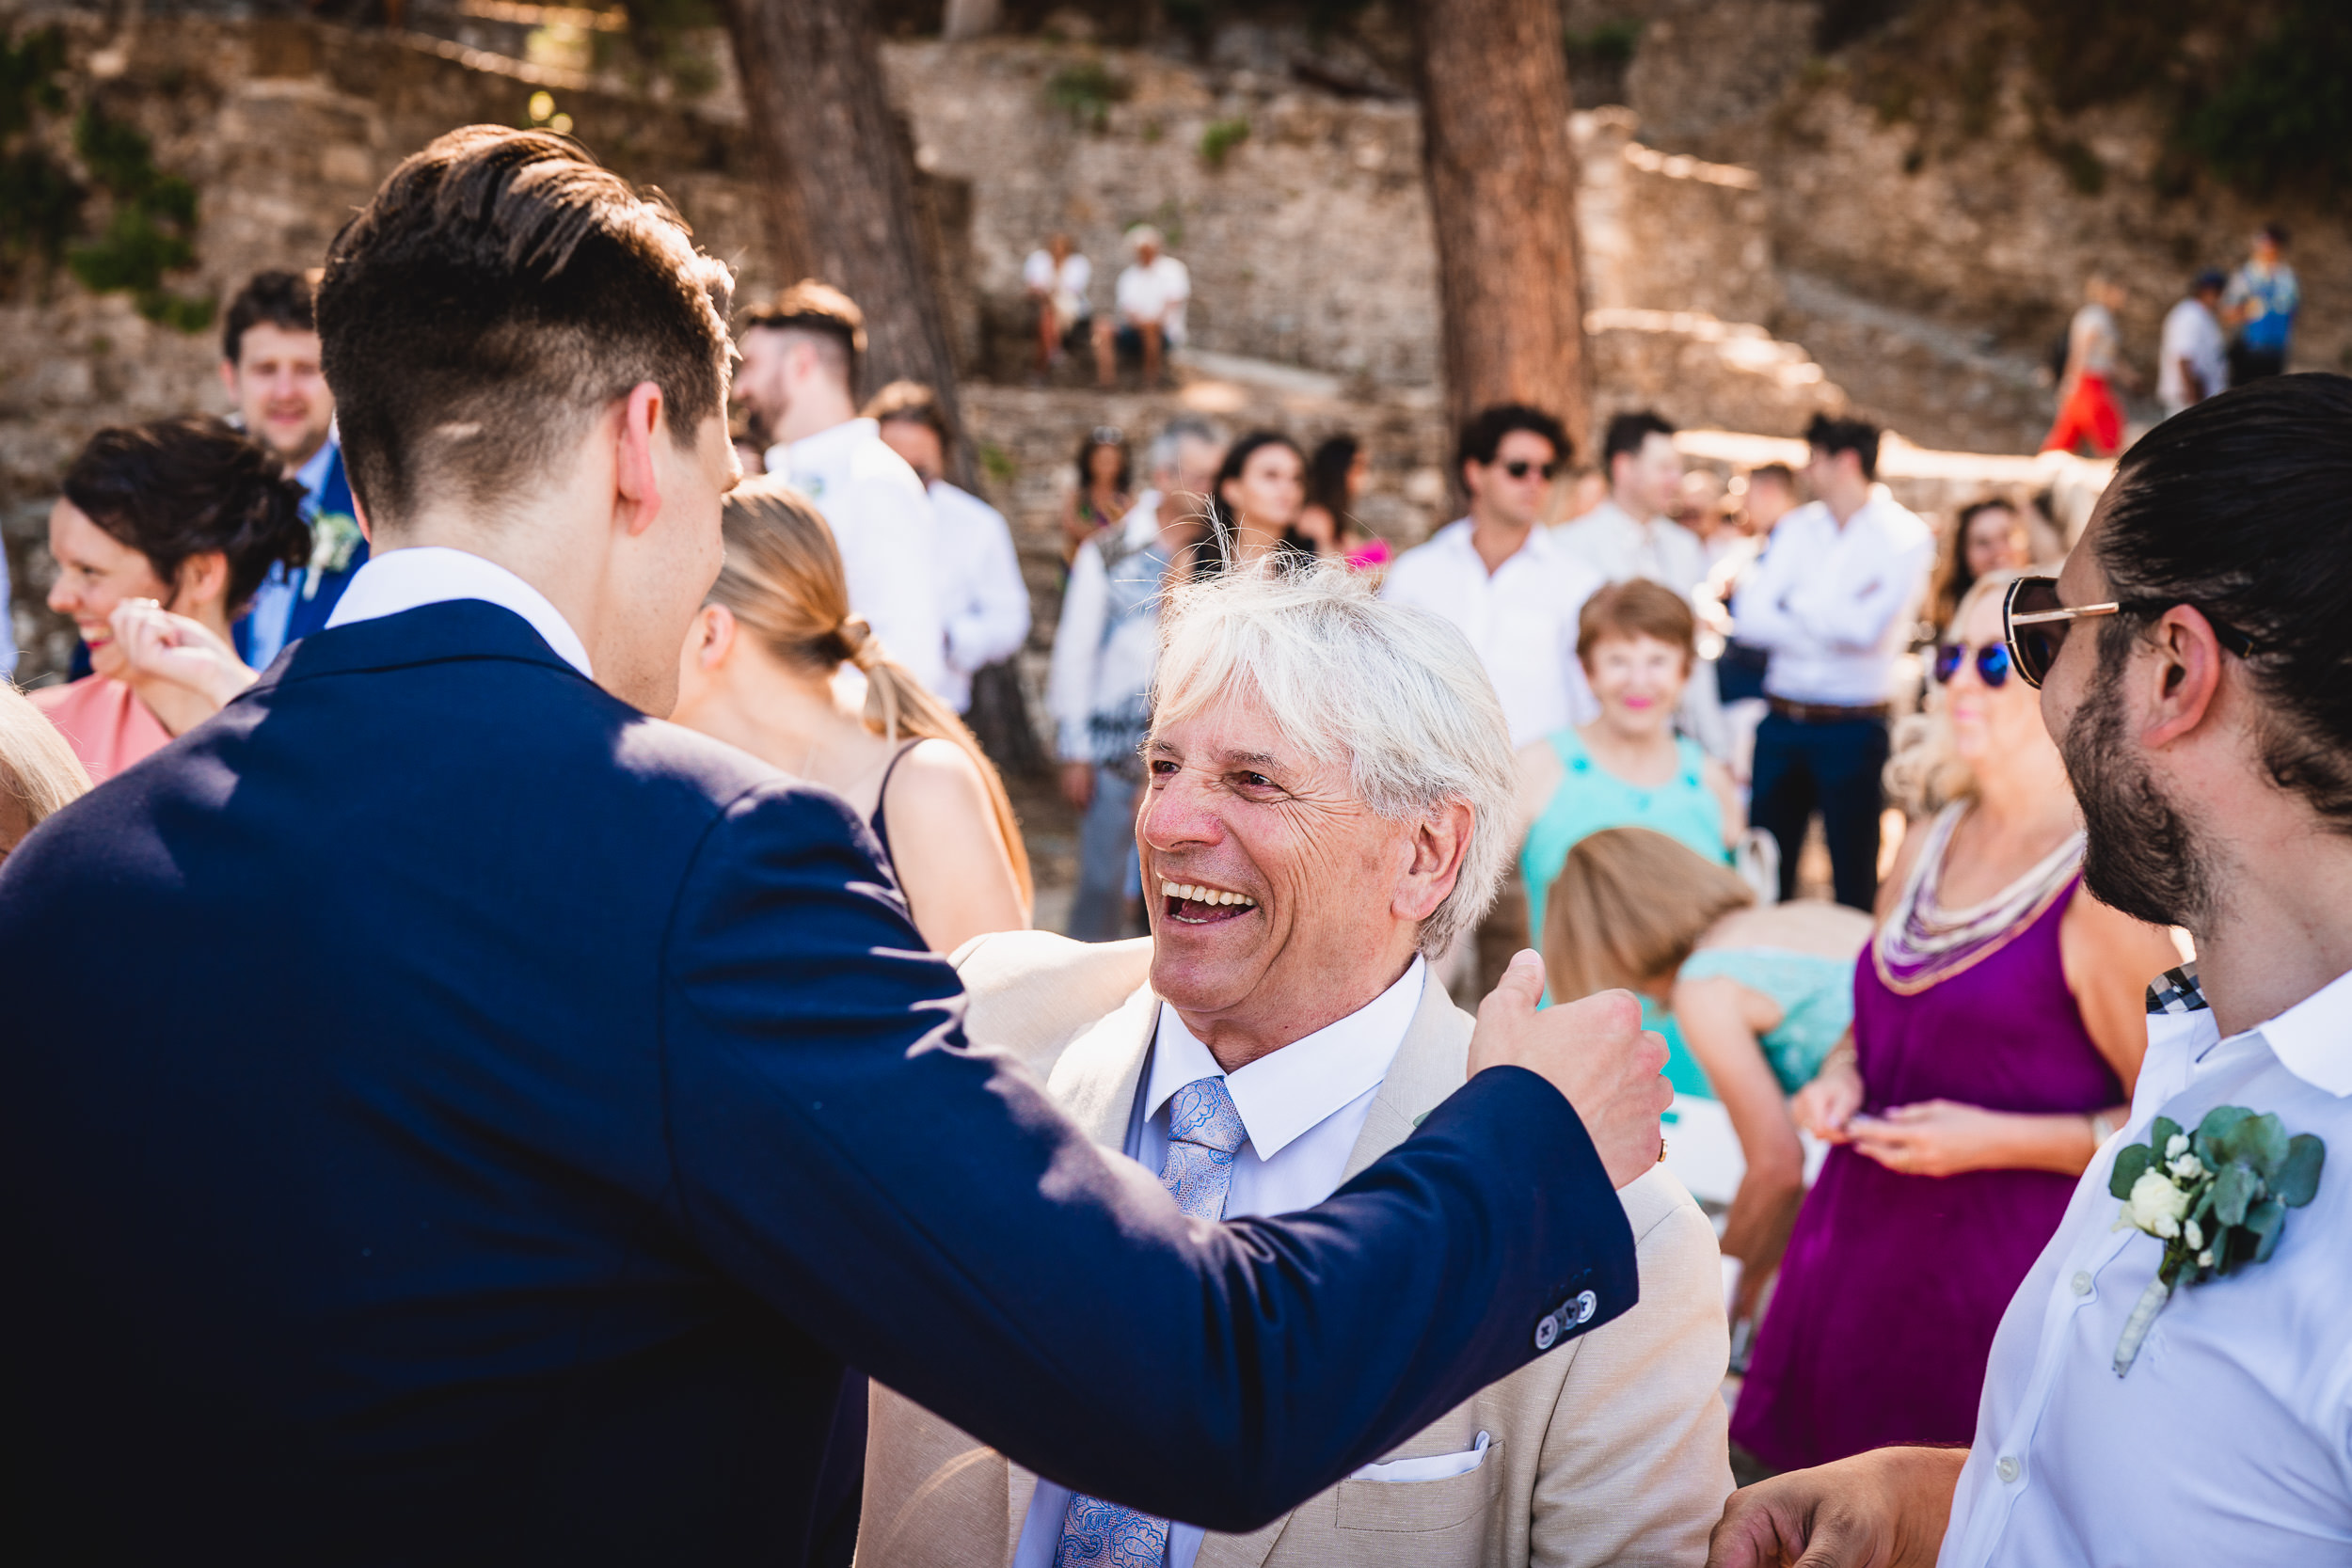 At a wedding, a man in a suit is laughing with another man while the wedding photographer captures the moment.